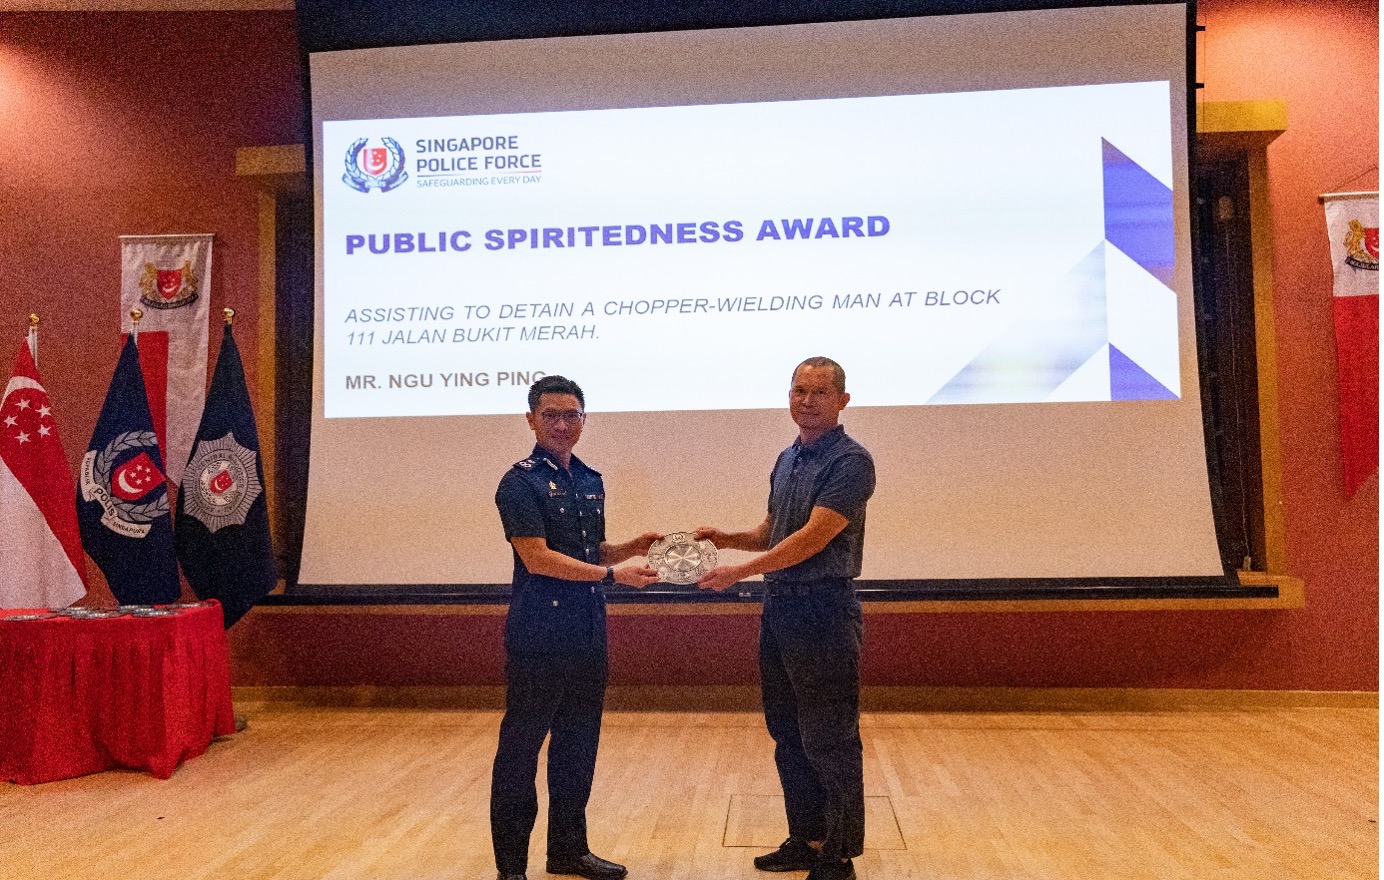 Eleven Members Of The Public Presented With Public Spiritedness Award